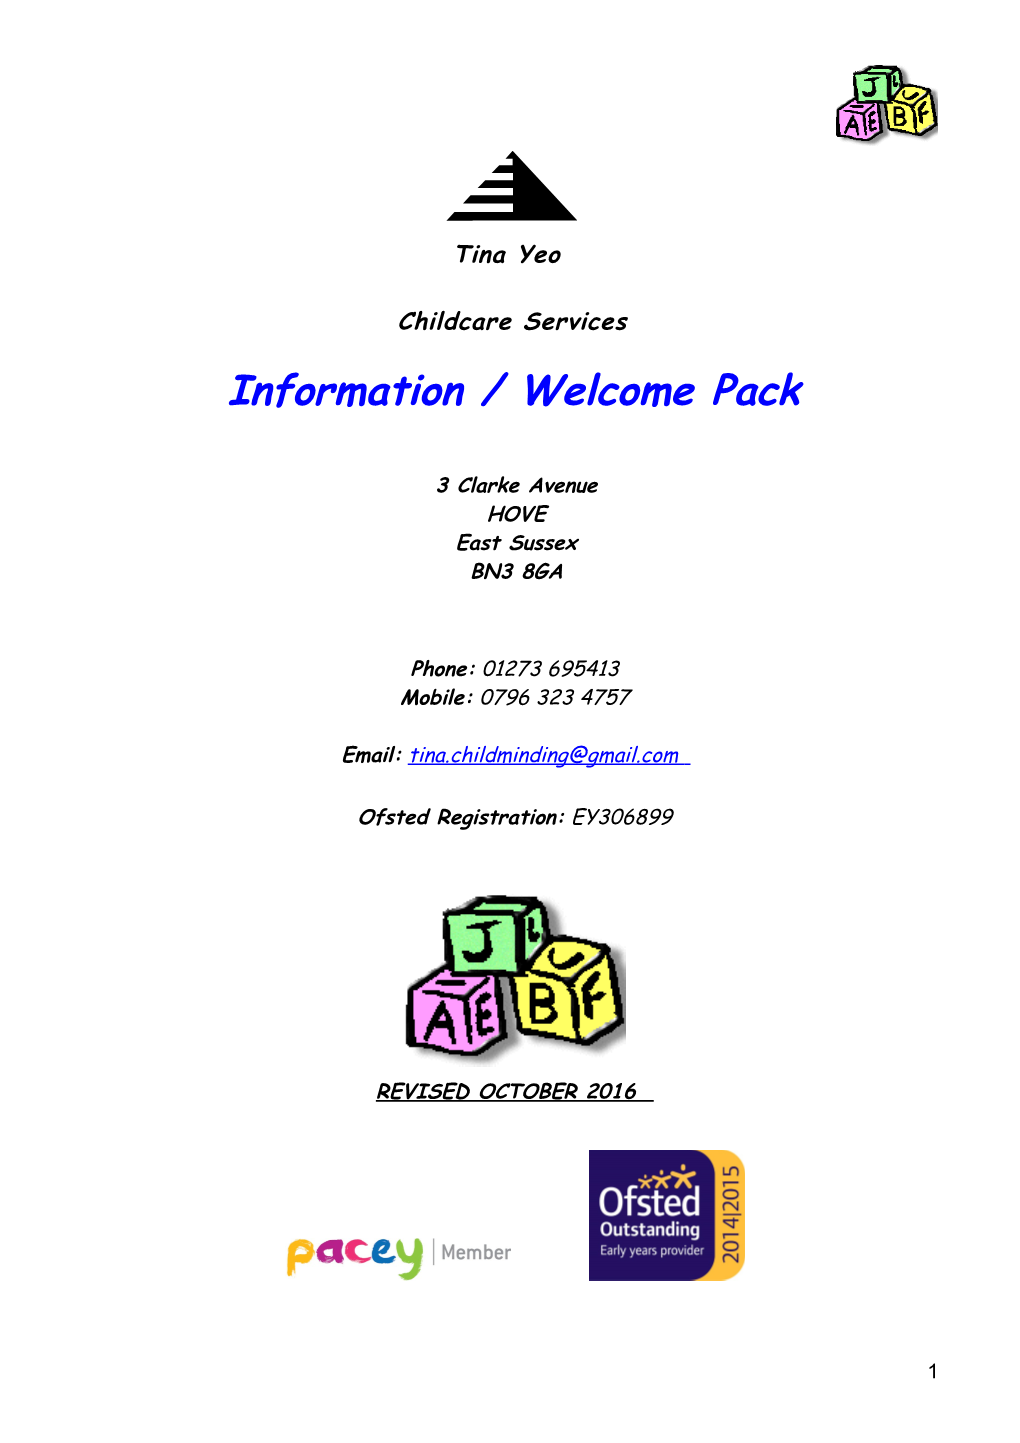 Information / Welcome Pack